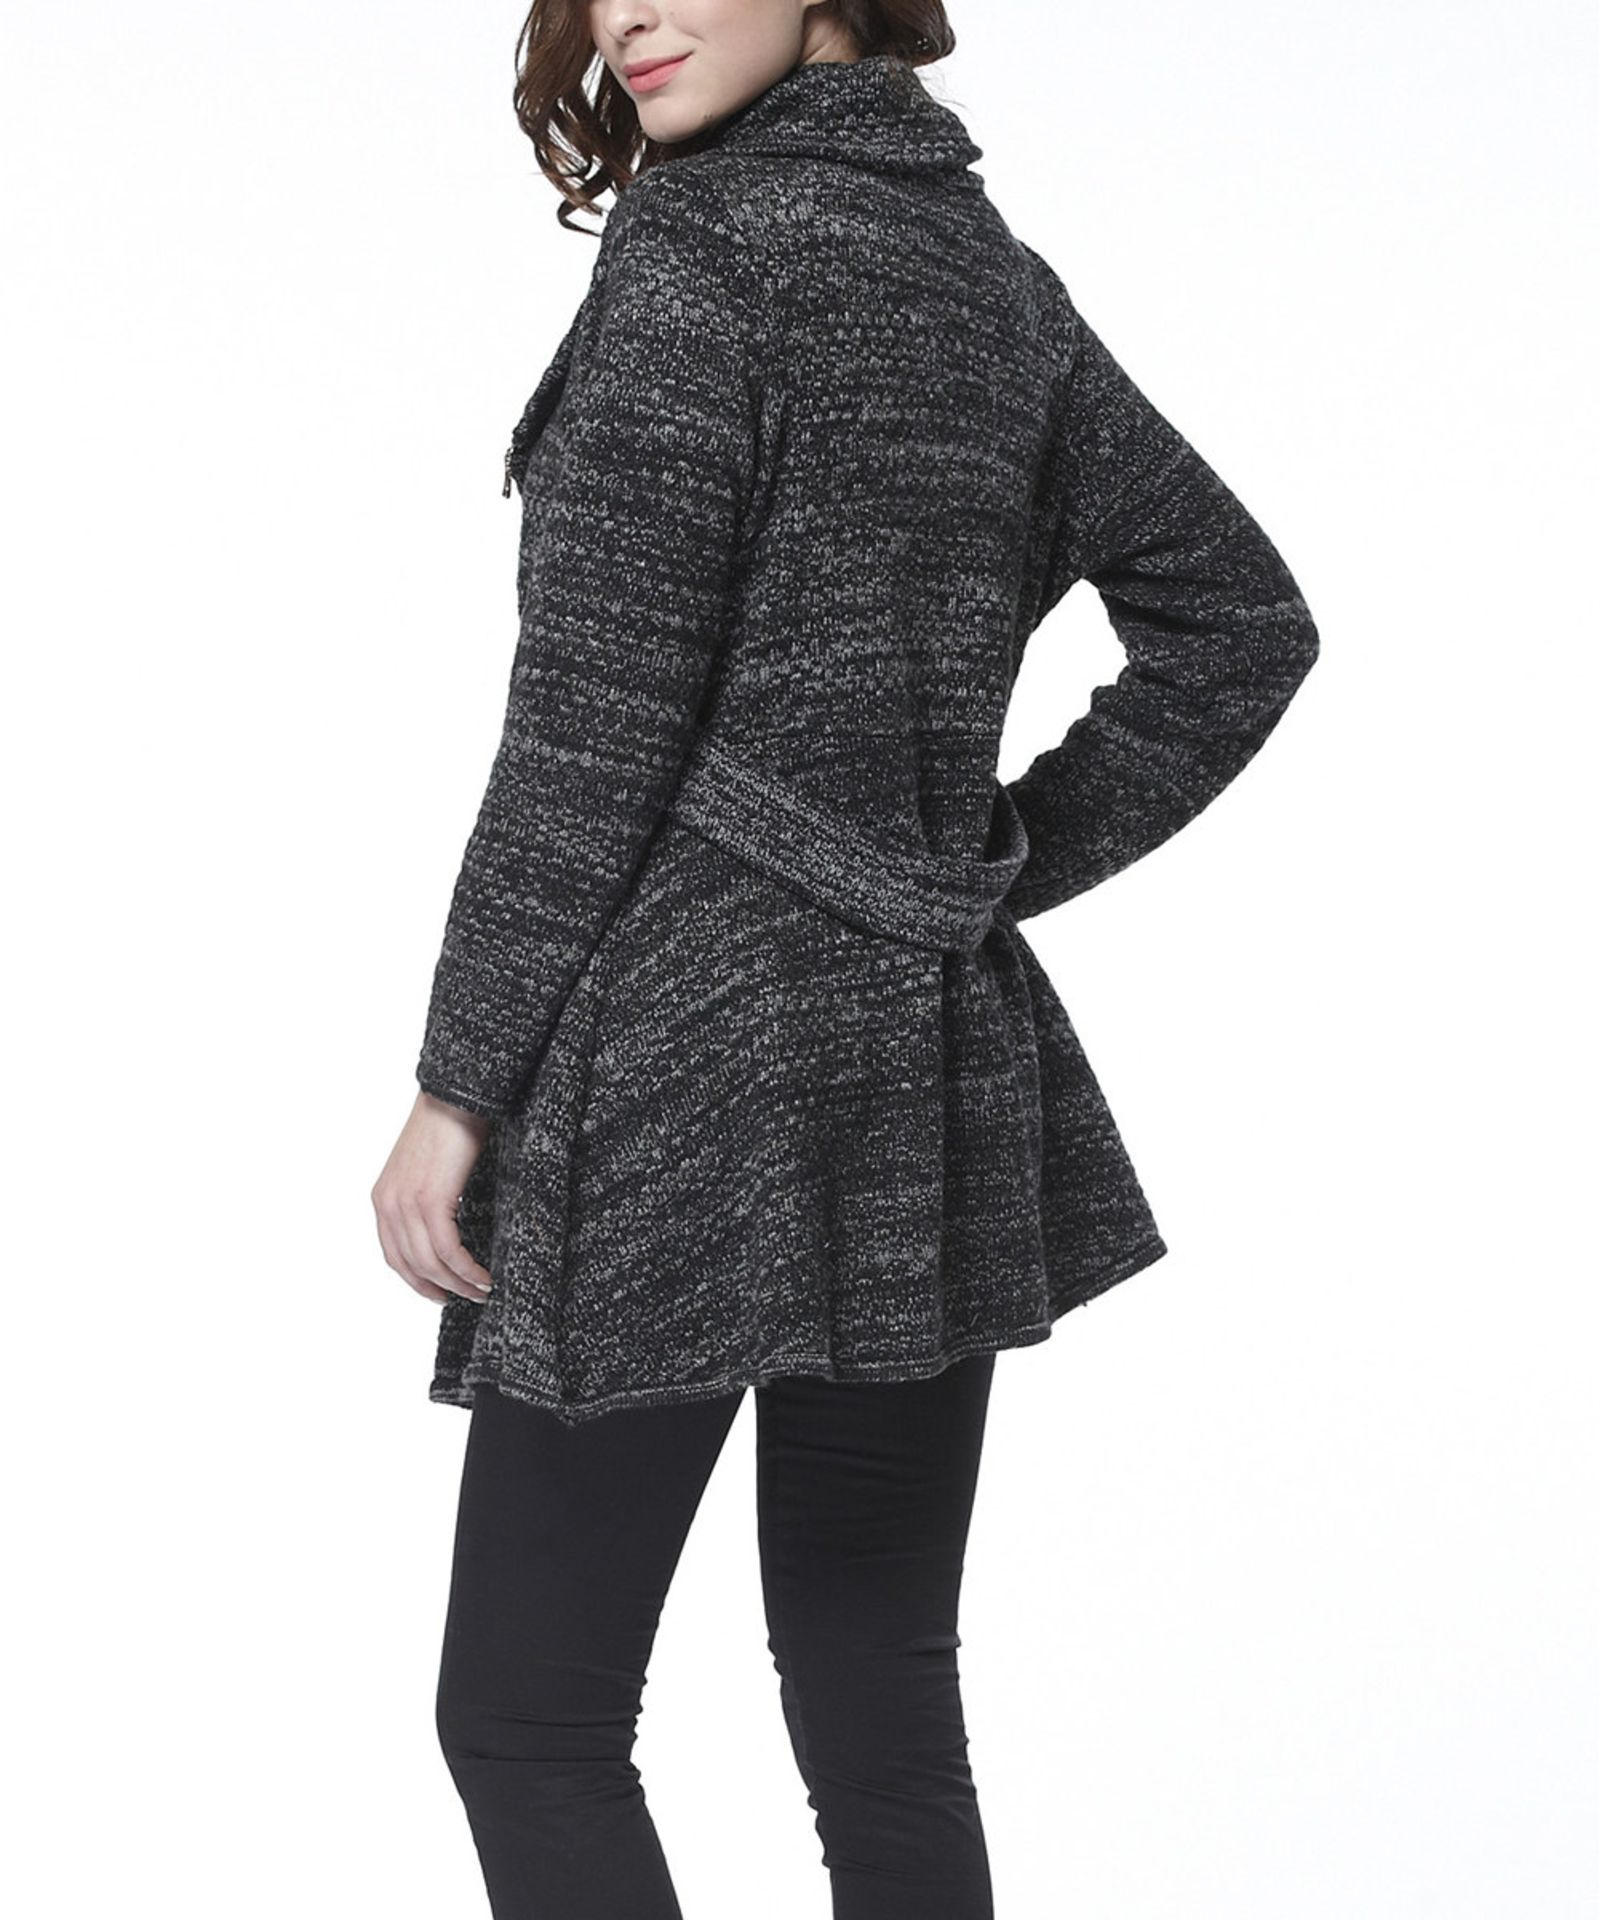 Simply Couture Black Wool-Blend Belted Cardigan (Us Size: M) [Ref: 29623998] - Image 3 of 3